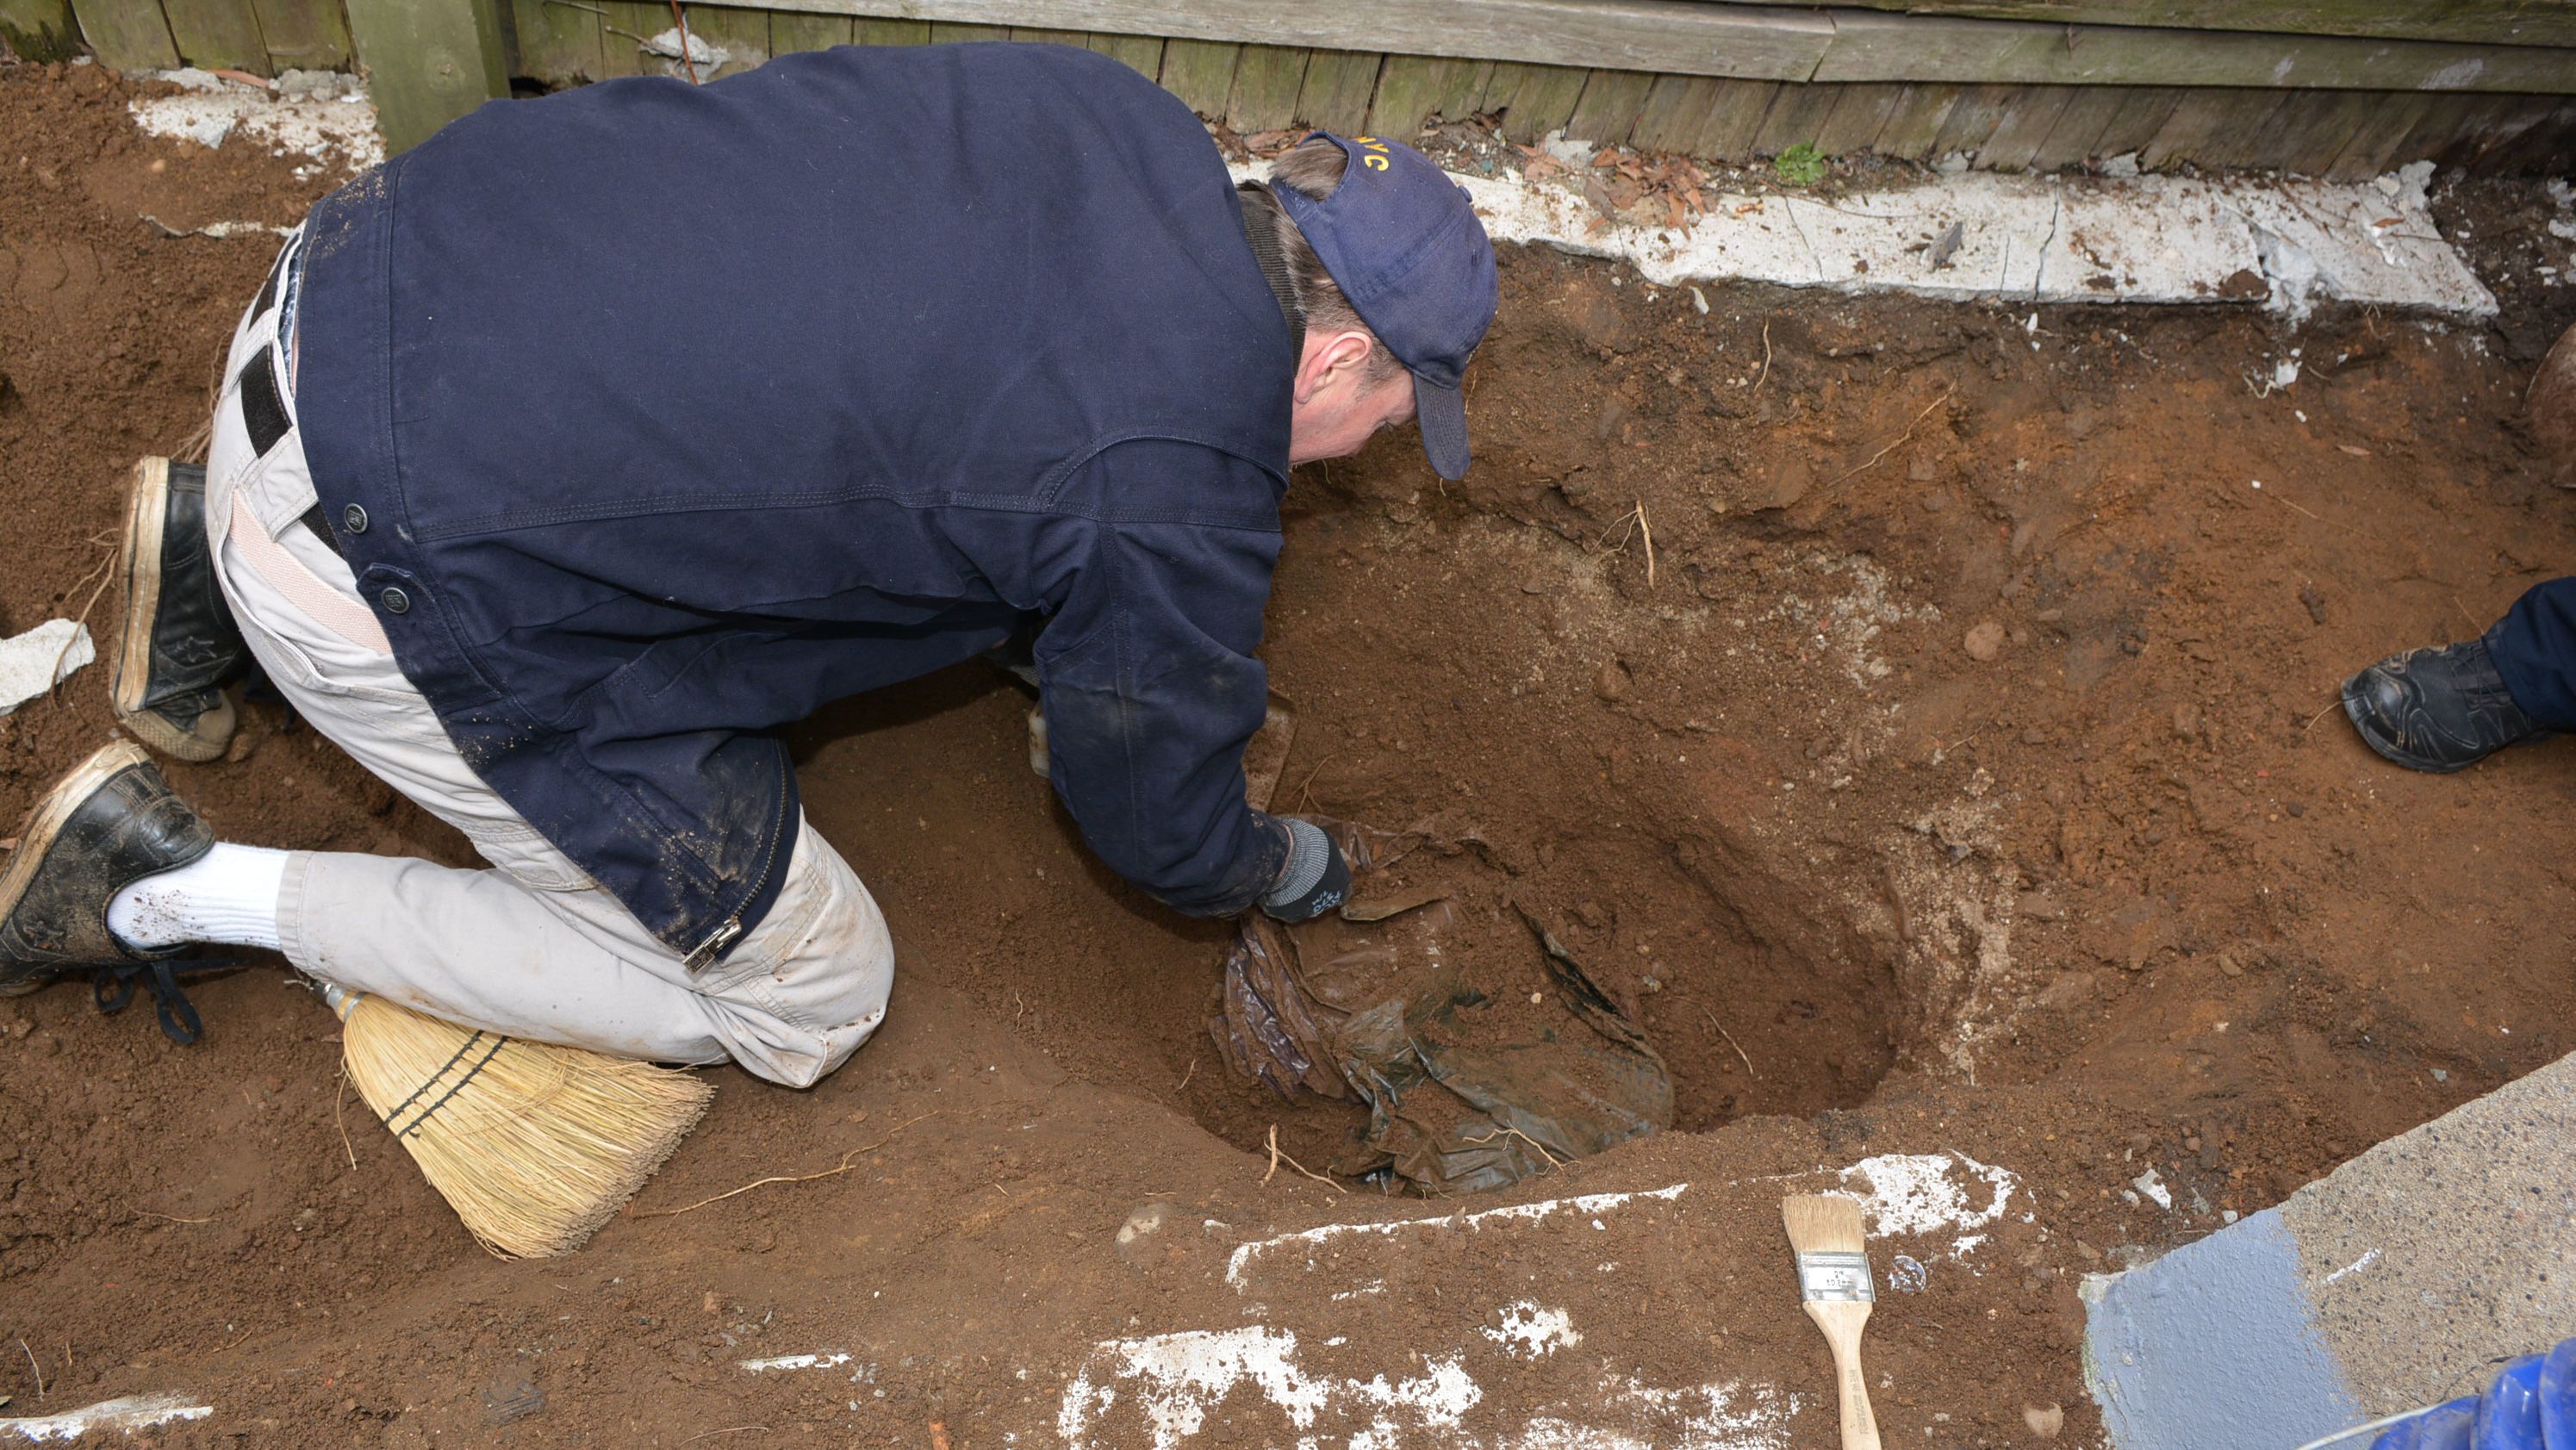 Human remains were discovered buried under concrete in a backyard in Queens in March 2019.